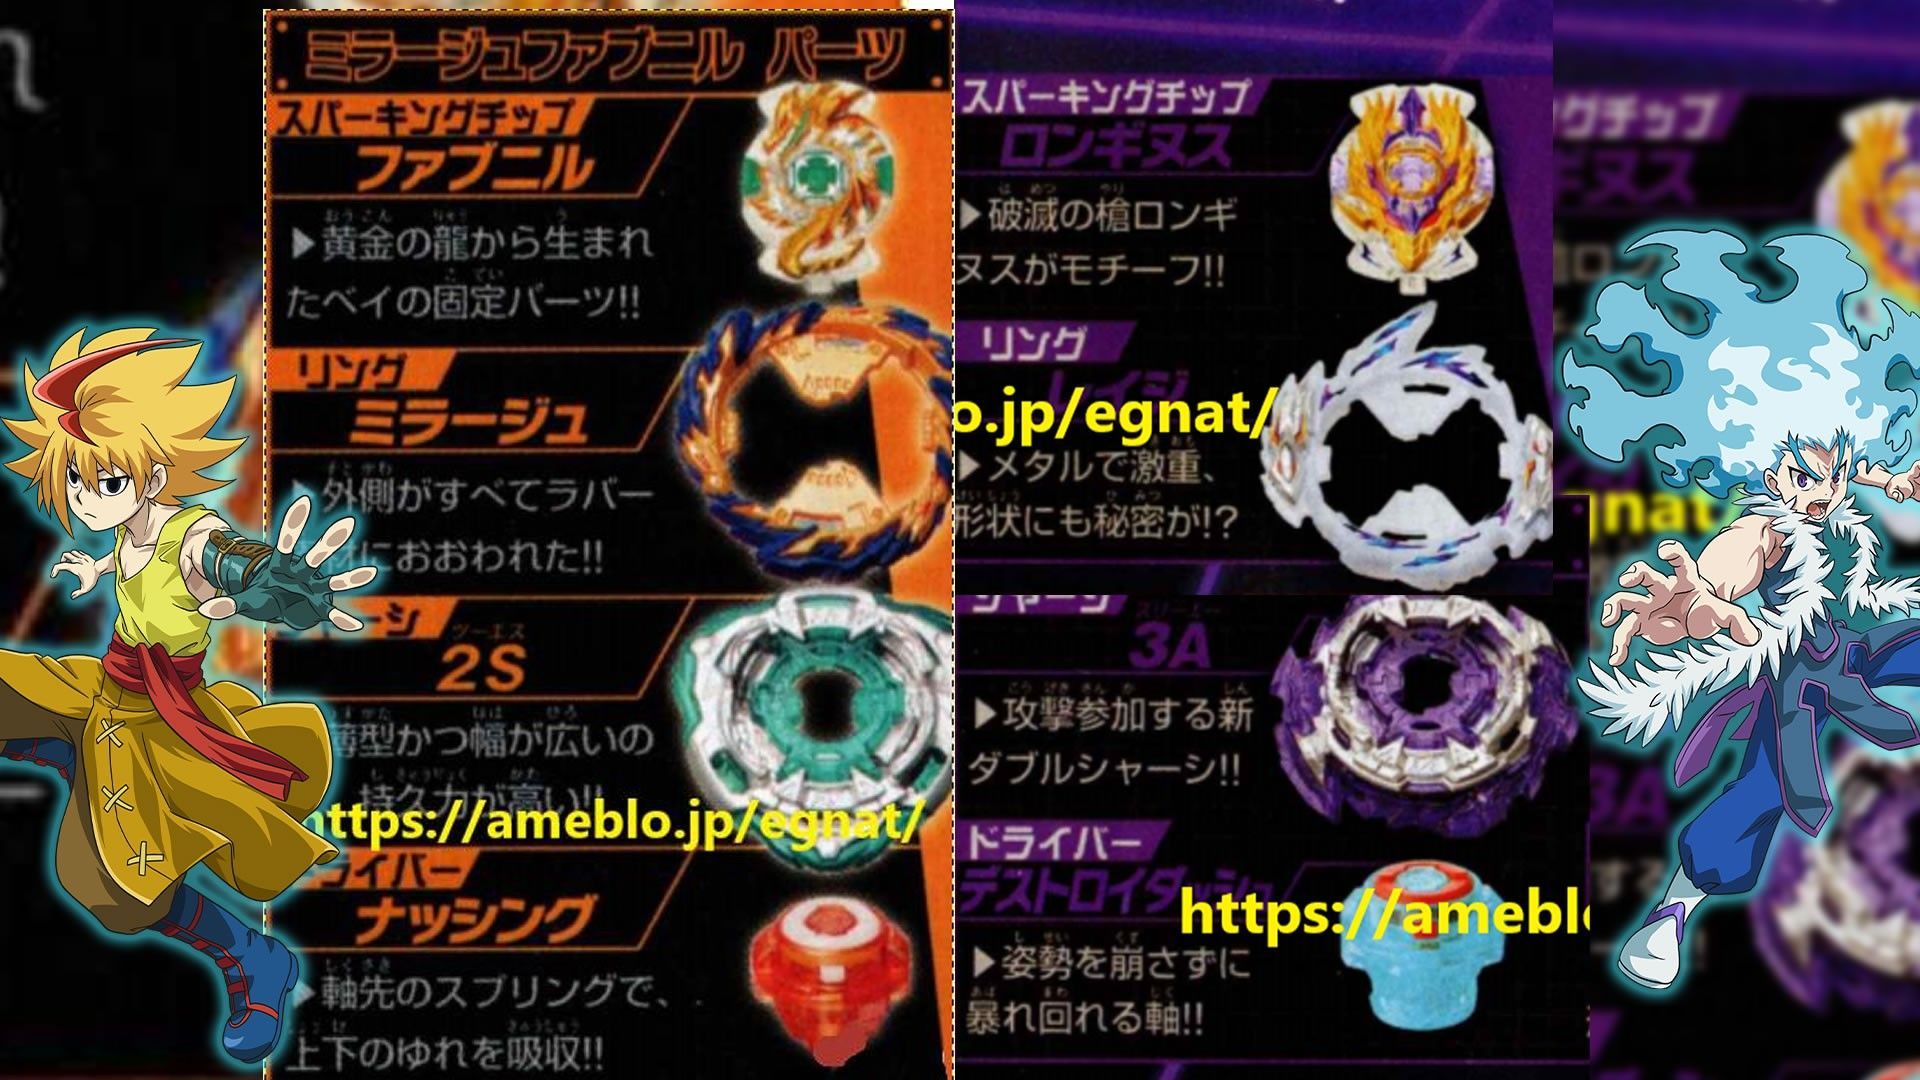 The picture of the new Fafnir and Longinus and their stock parts were finally revealed.The new Fafnir and L. Best friends forever, My best friend, Beyblade burst